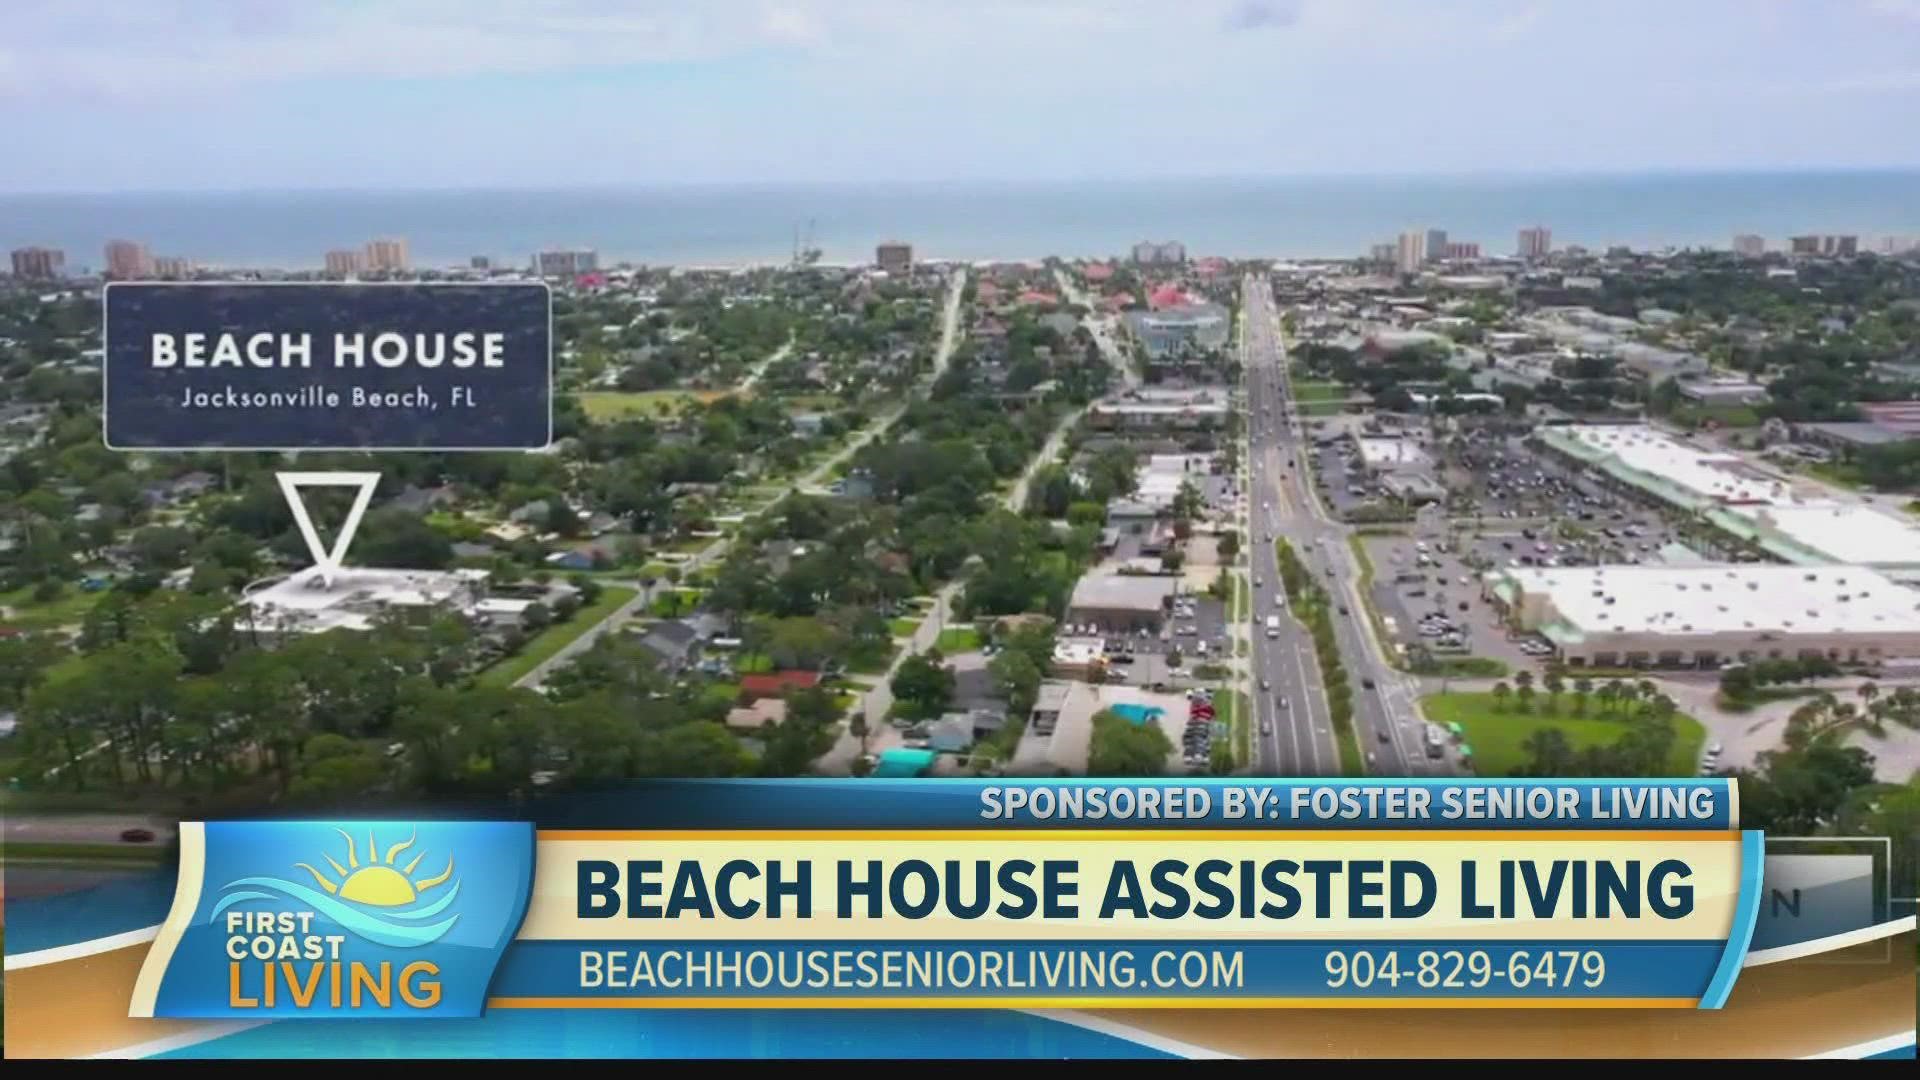 Bethany Larkins, the Executive Director of Beach House fills us in on what makes Beach House a "one stop shop" for residents looking to live life to the fullest.